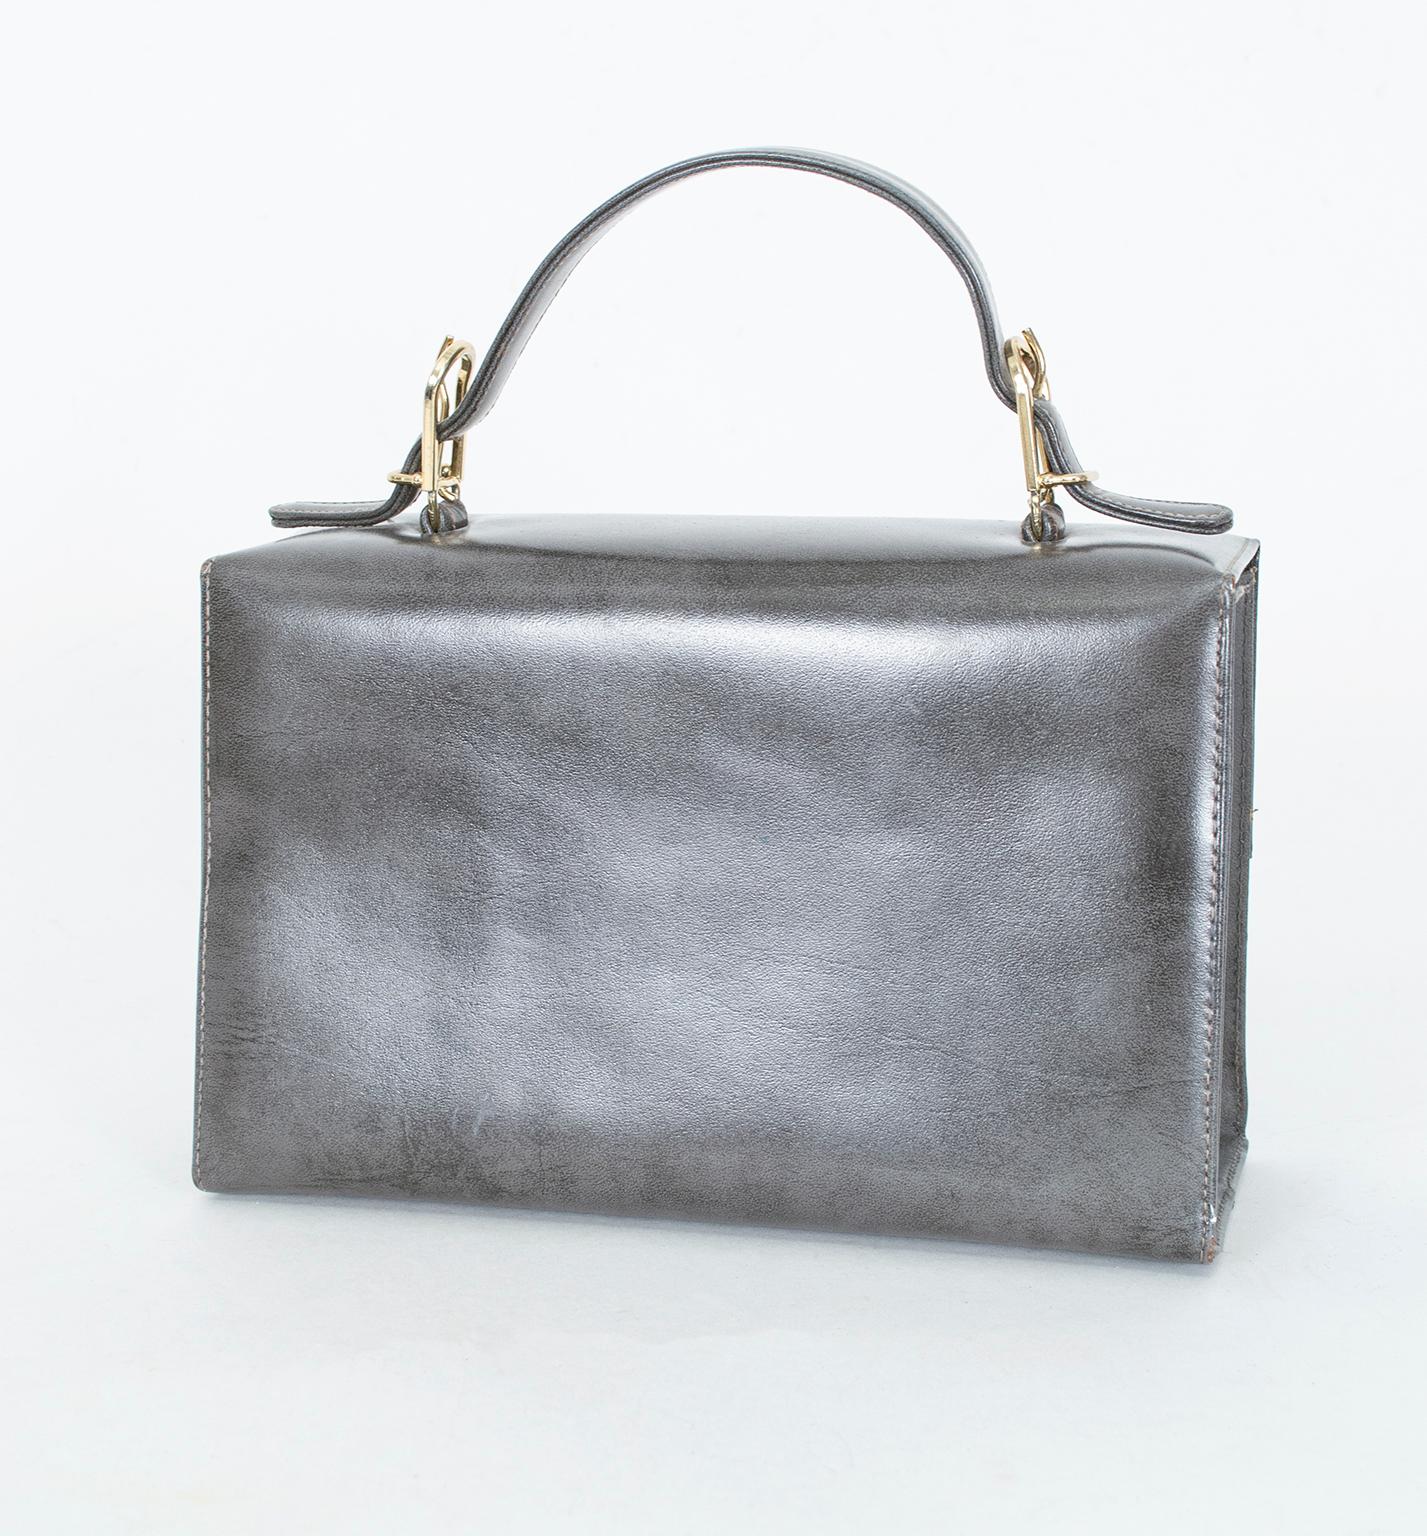 A structured, ladylike handbag for ALL fifty shades of gray, this purse combines polish and geometry with practicality. An extremely hard-to-find color for handbags, this medium gray is a soft neutral that pairs strikingly with everything from